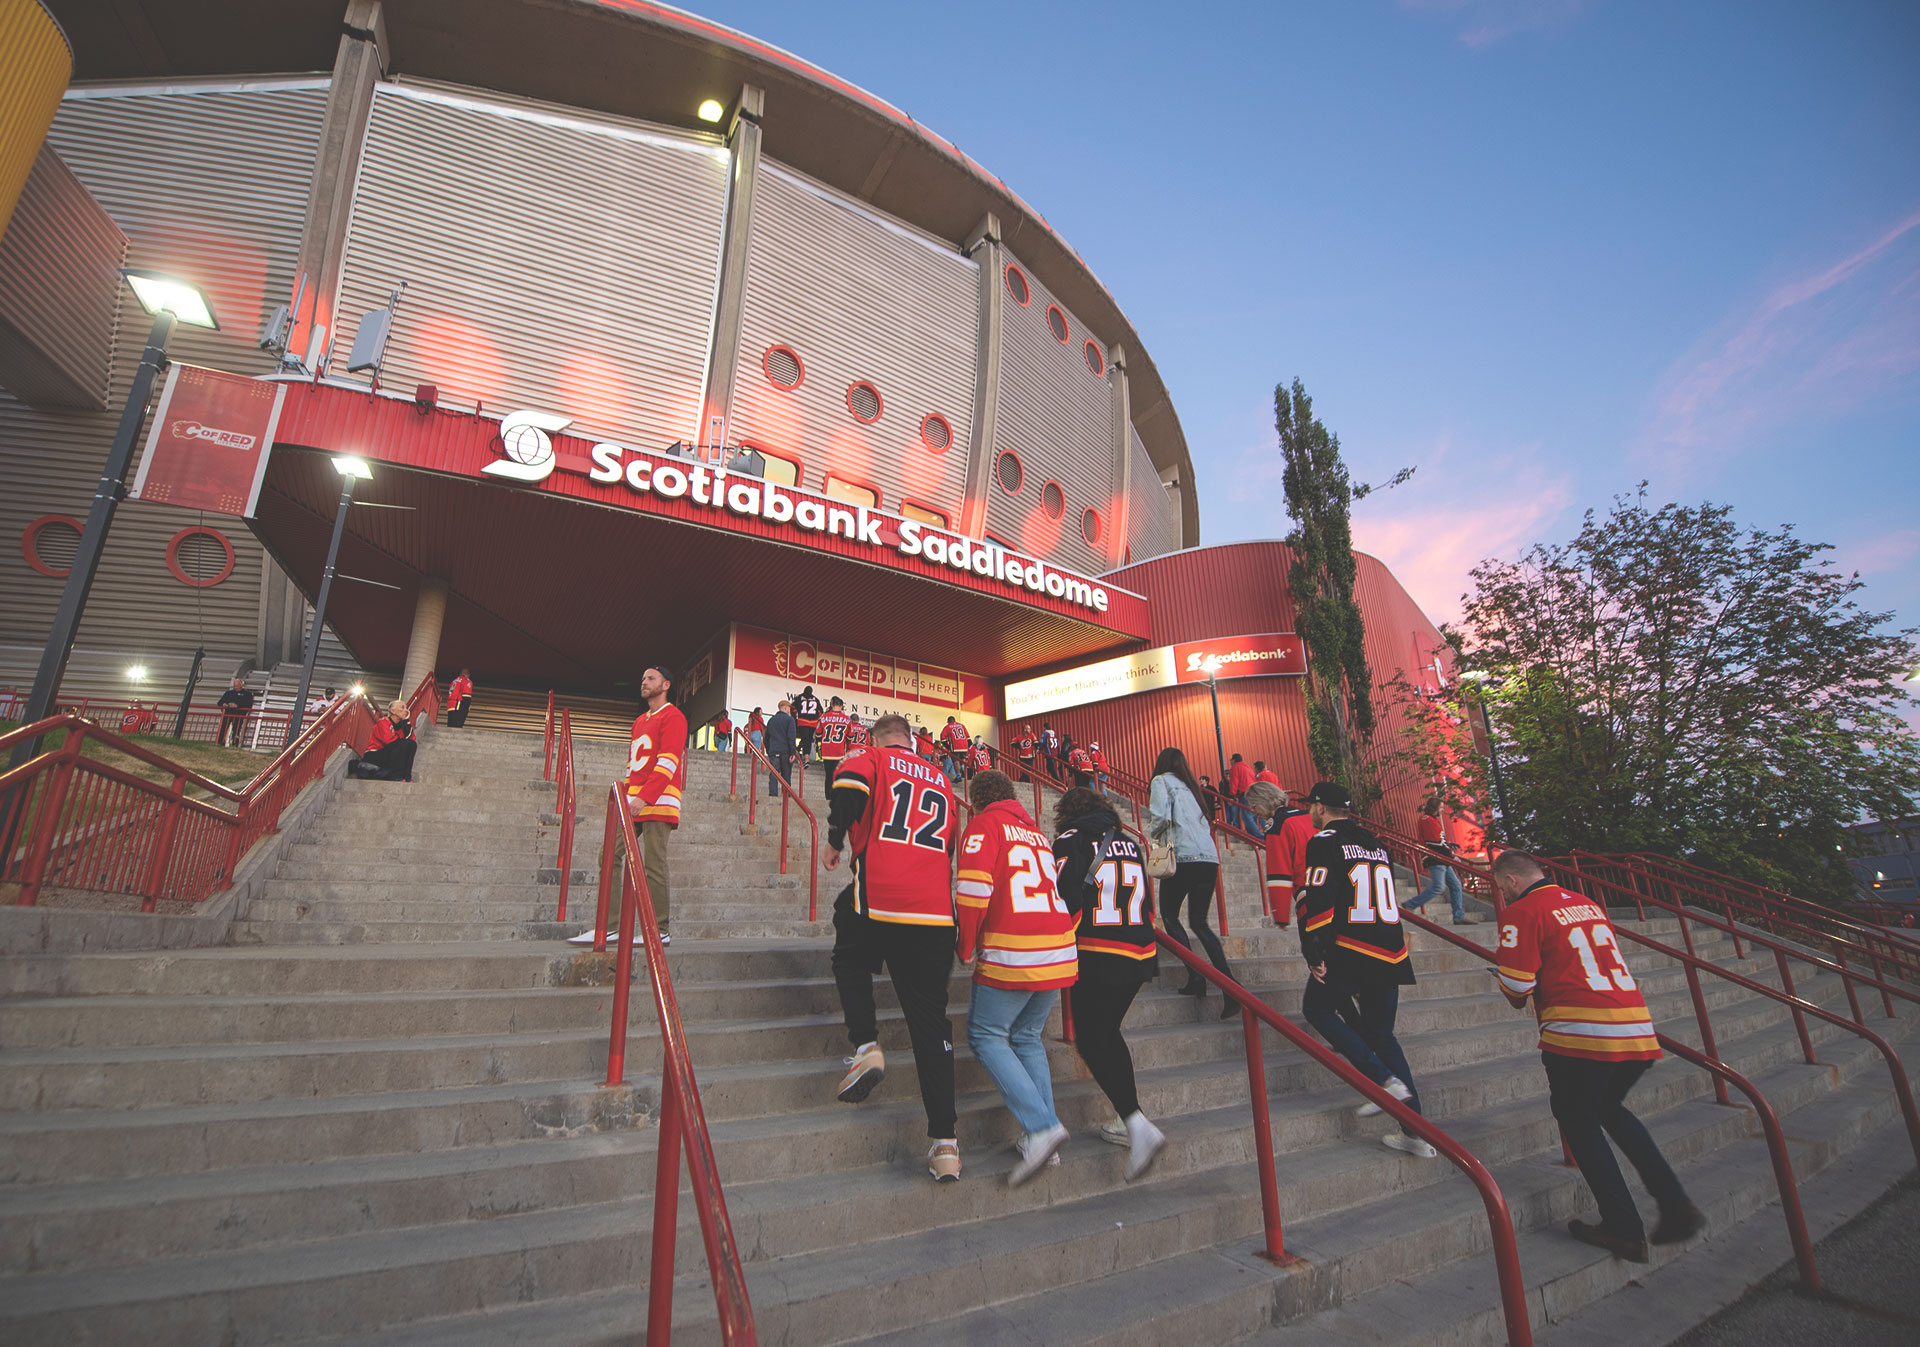 Calgary Flames Fans walking up to the Scotiabank Saddledome